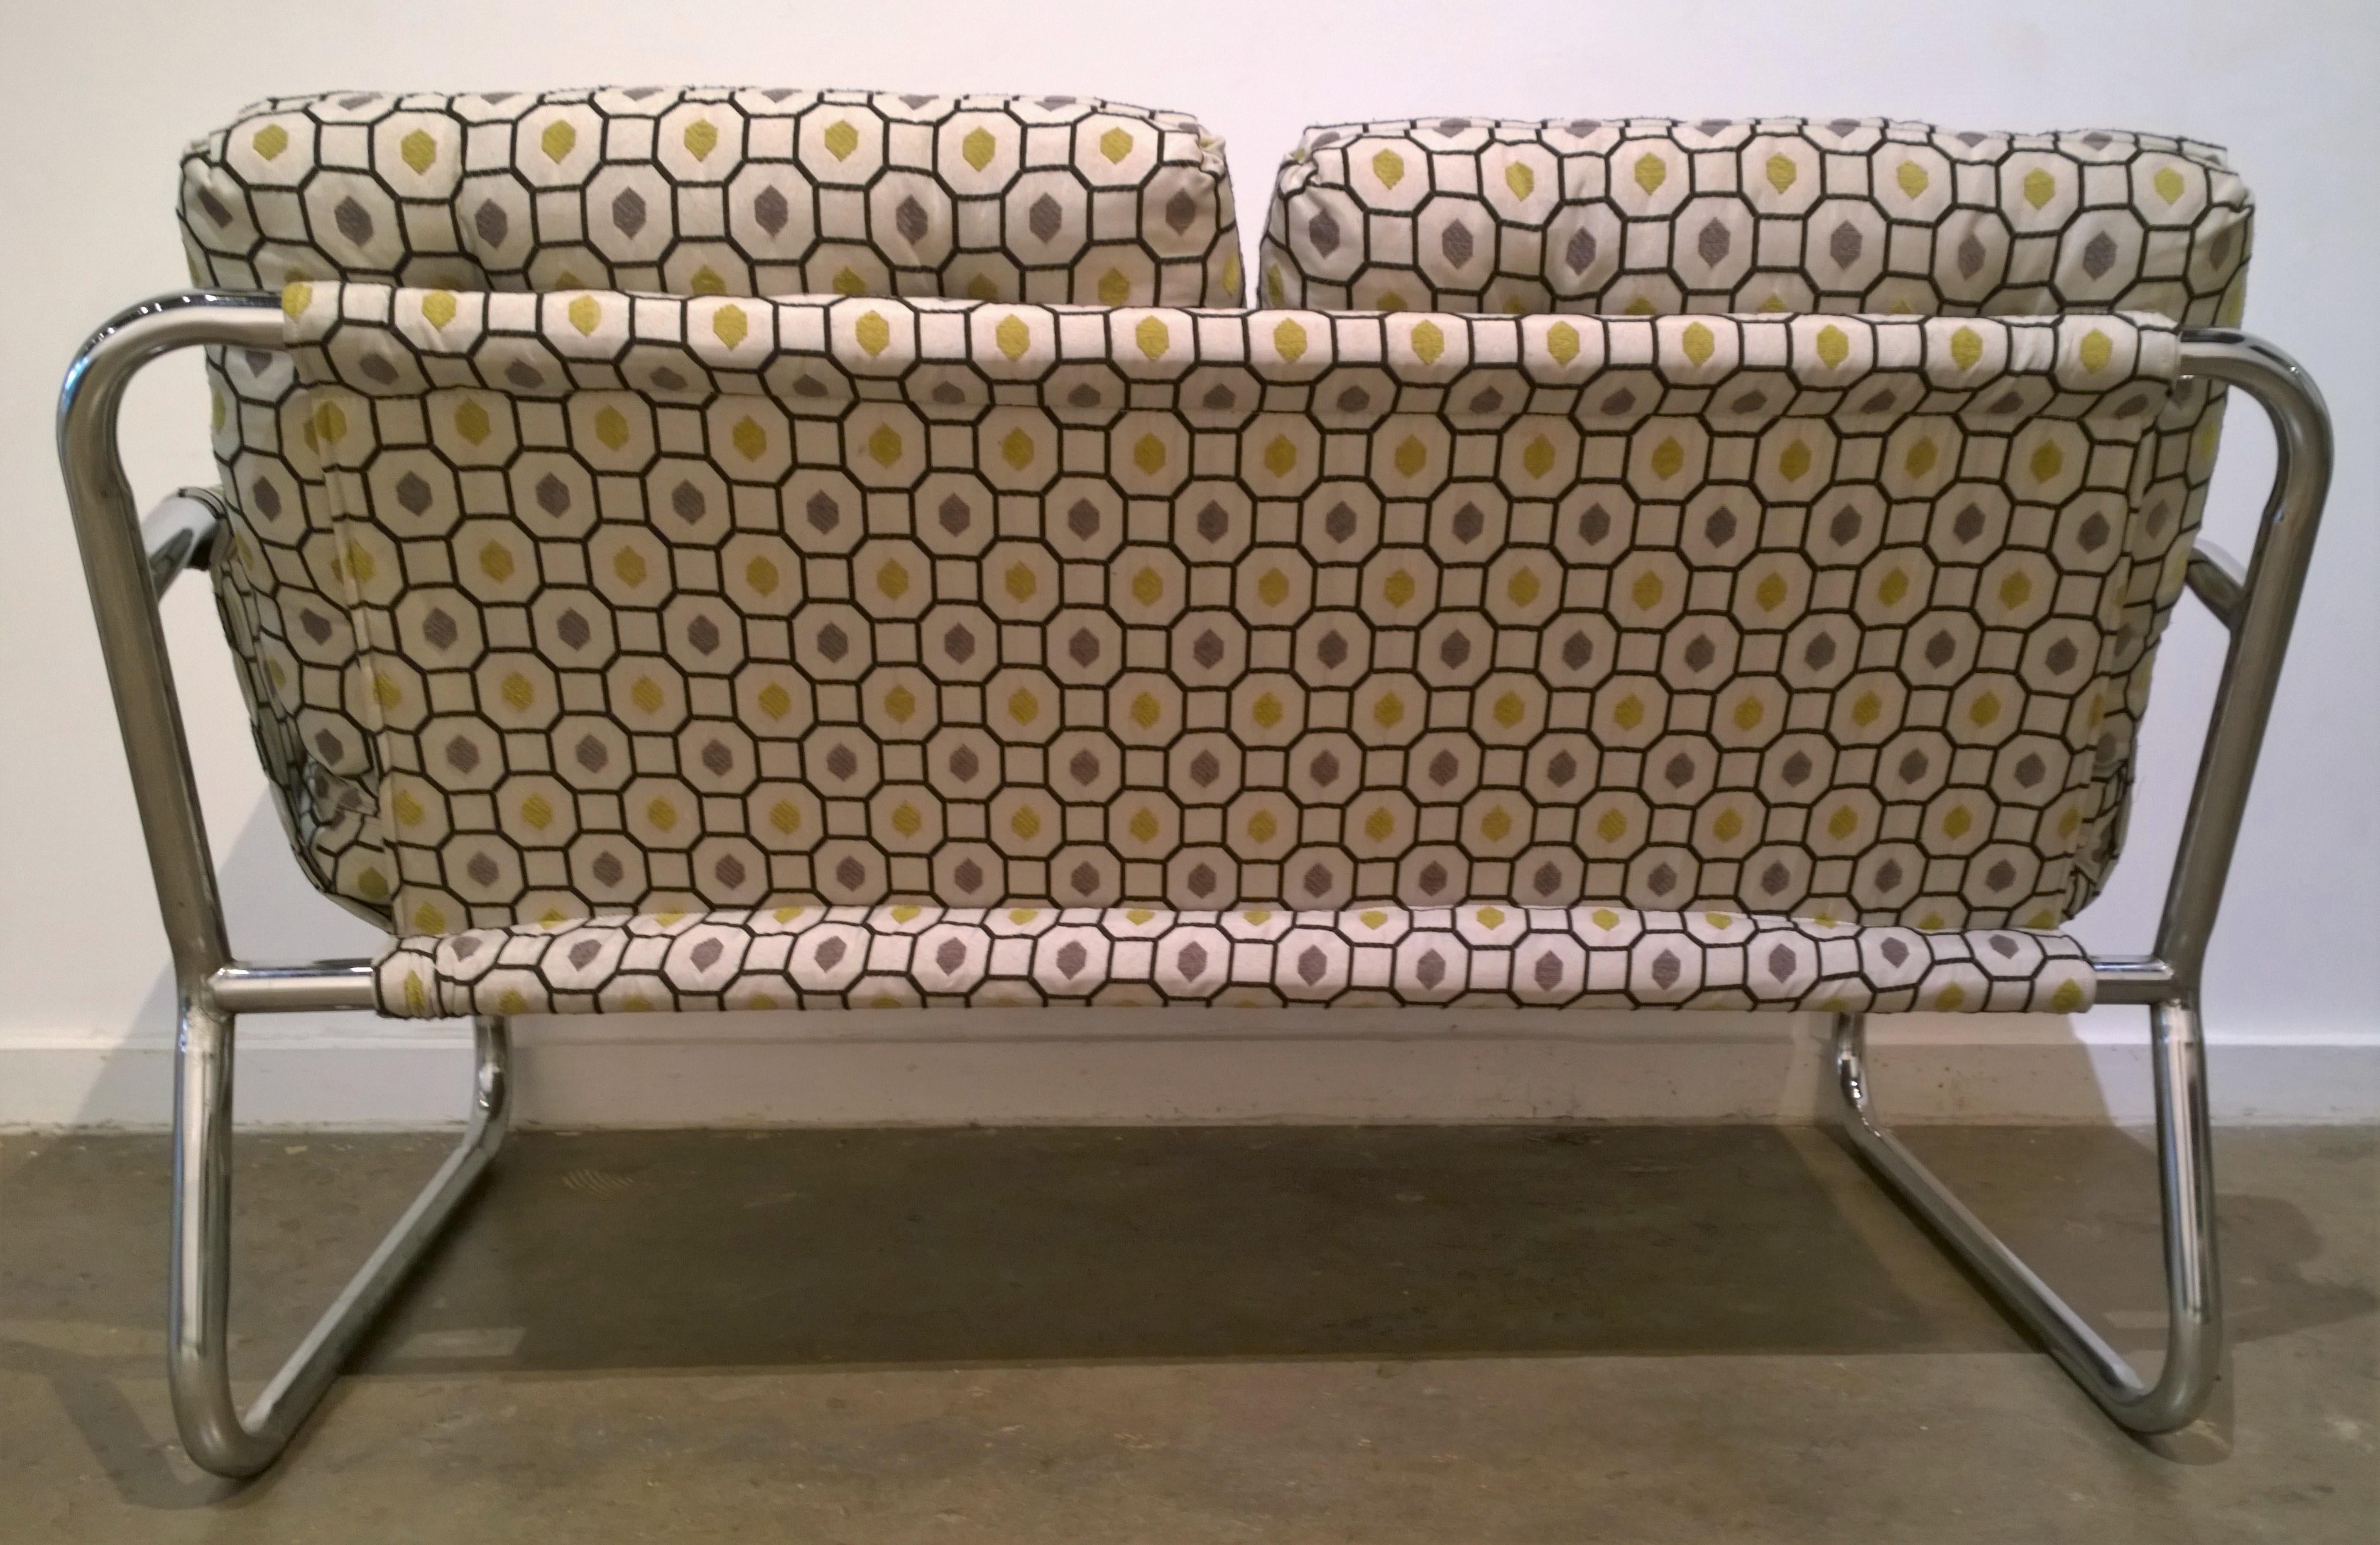 Zermatt Tubular Chrome Sling-Back Settee Upholstered in Gray, Yellow and Black In Good Condition For Sale In Houston, TX